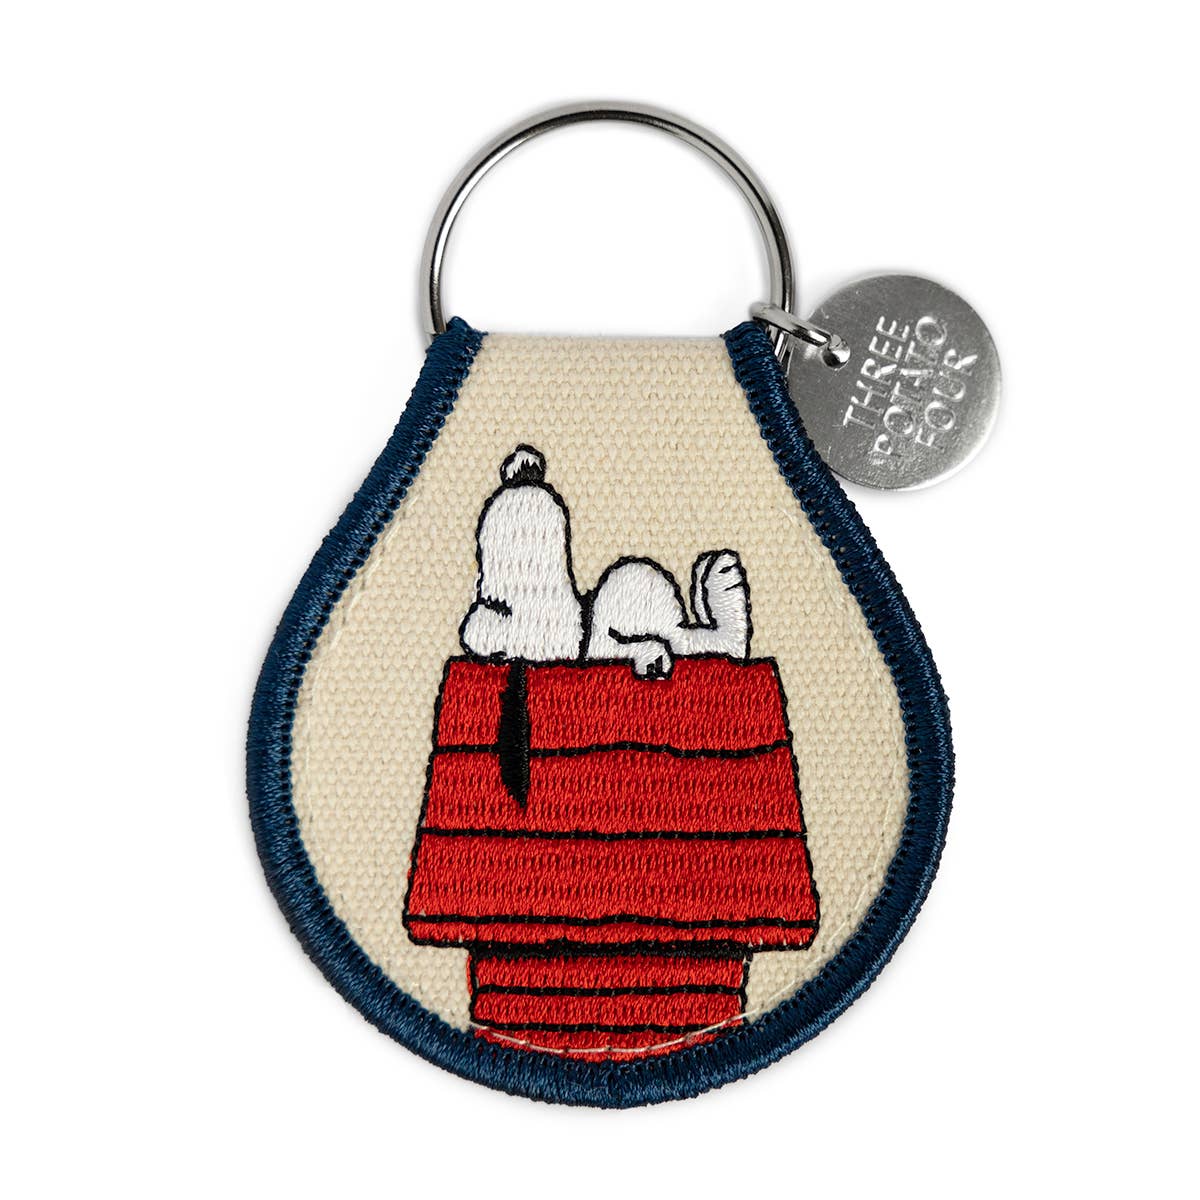 A Snoopy Keychain from Three Potato Four featuring Snoopy&#39;s doghouse.